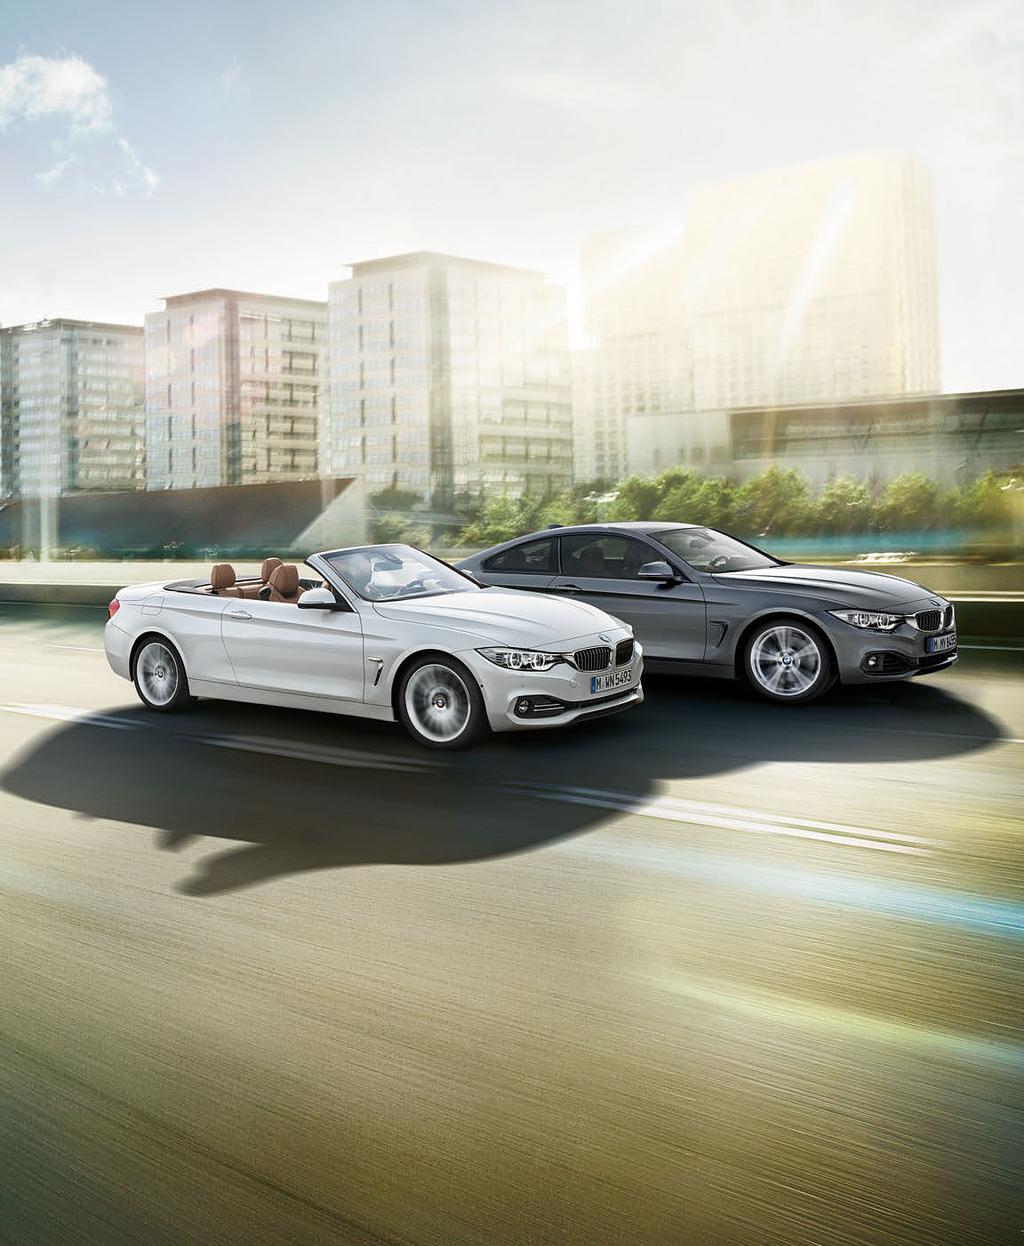 The BMW 4 Series Coupé Convertible www.bmw.